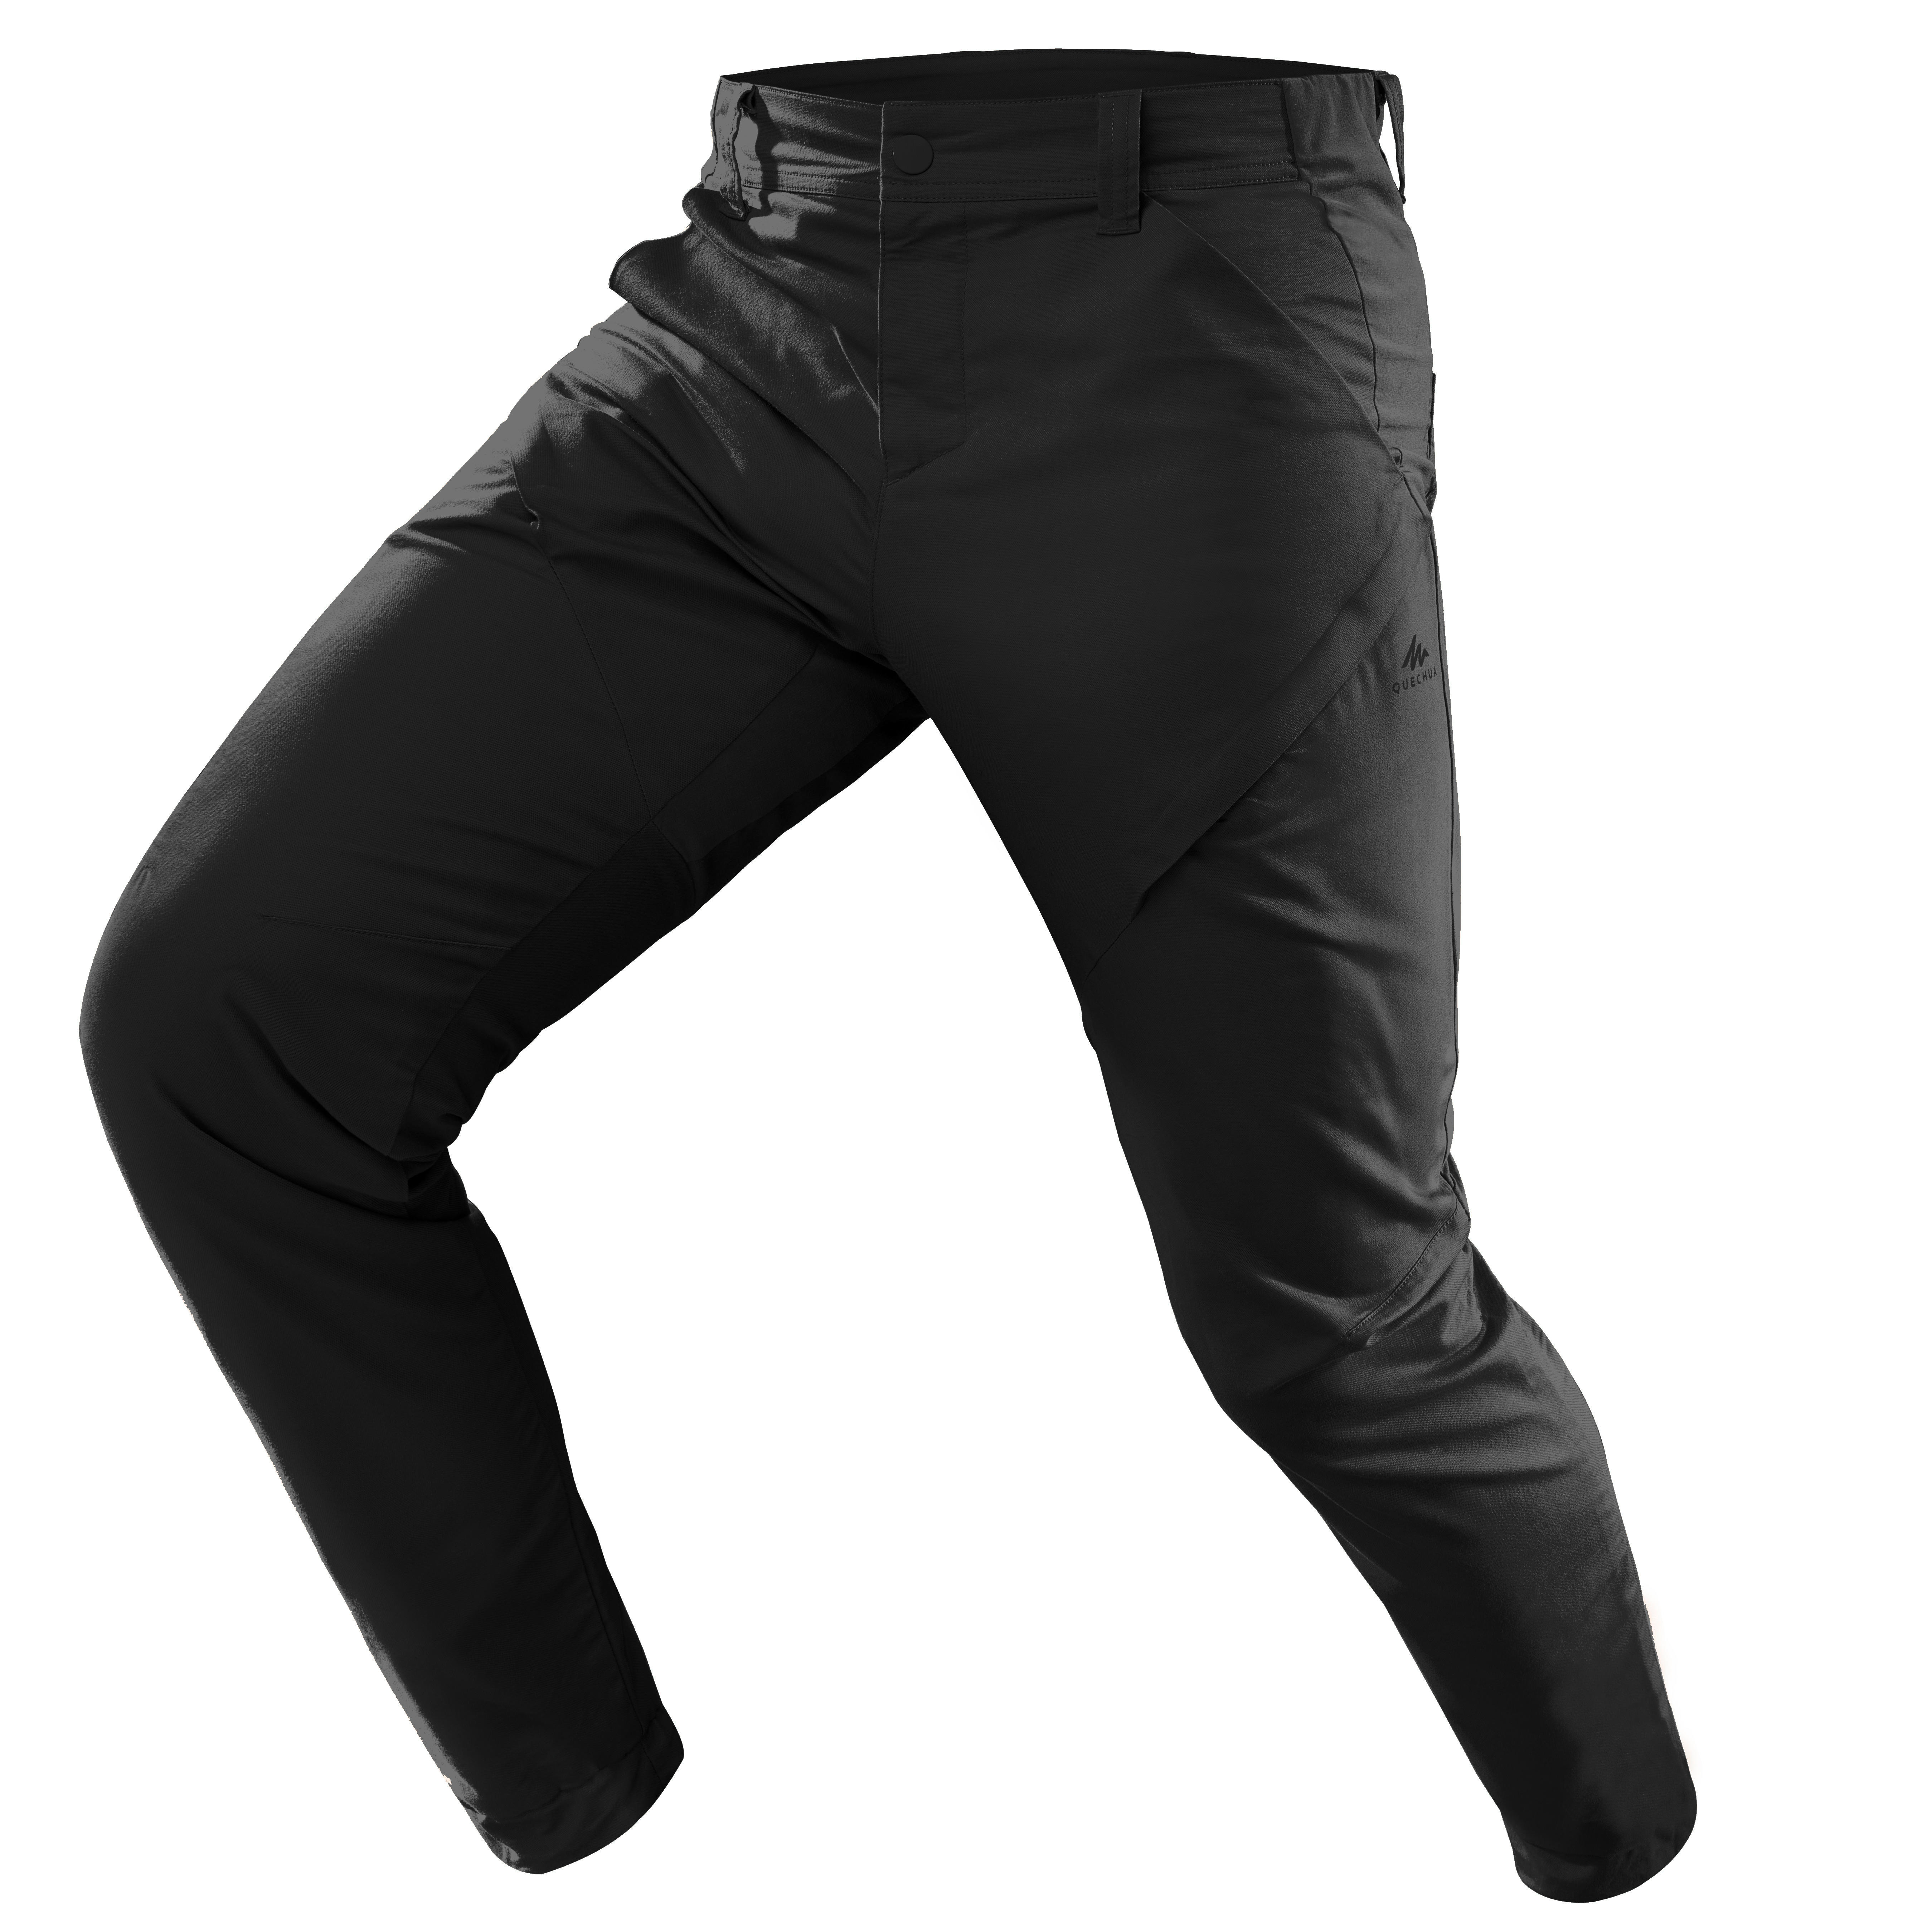 Augusta Avail Water Resistant Pant AS 3504 - Casual Clothing for Men,  Women, Youth, and Children